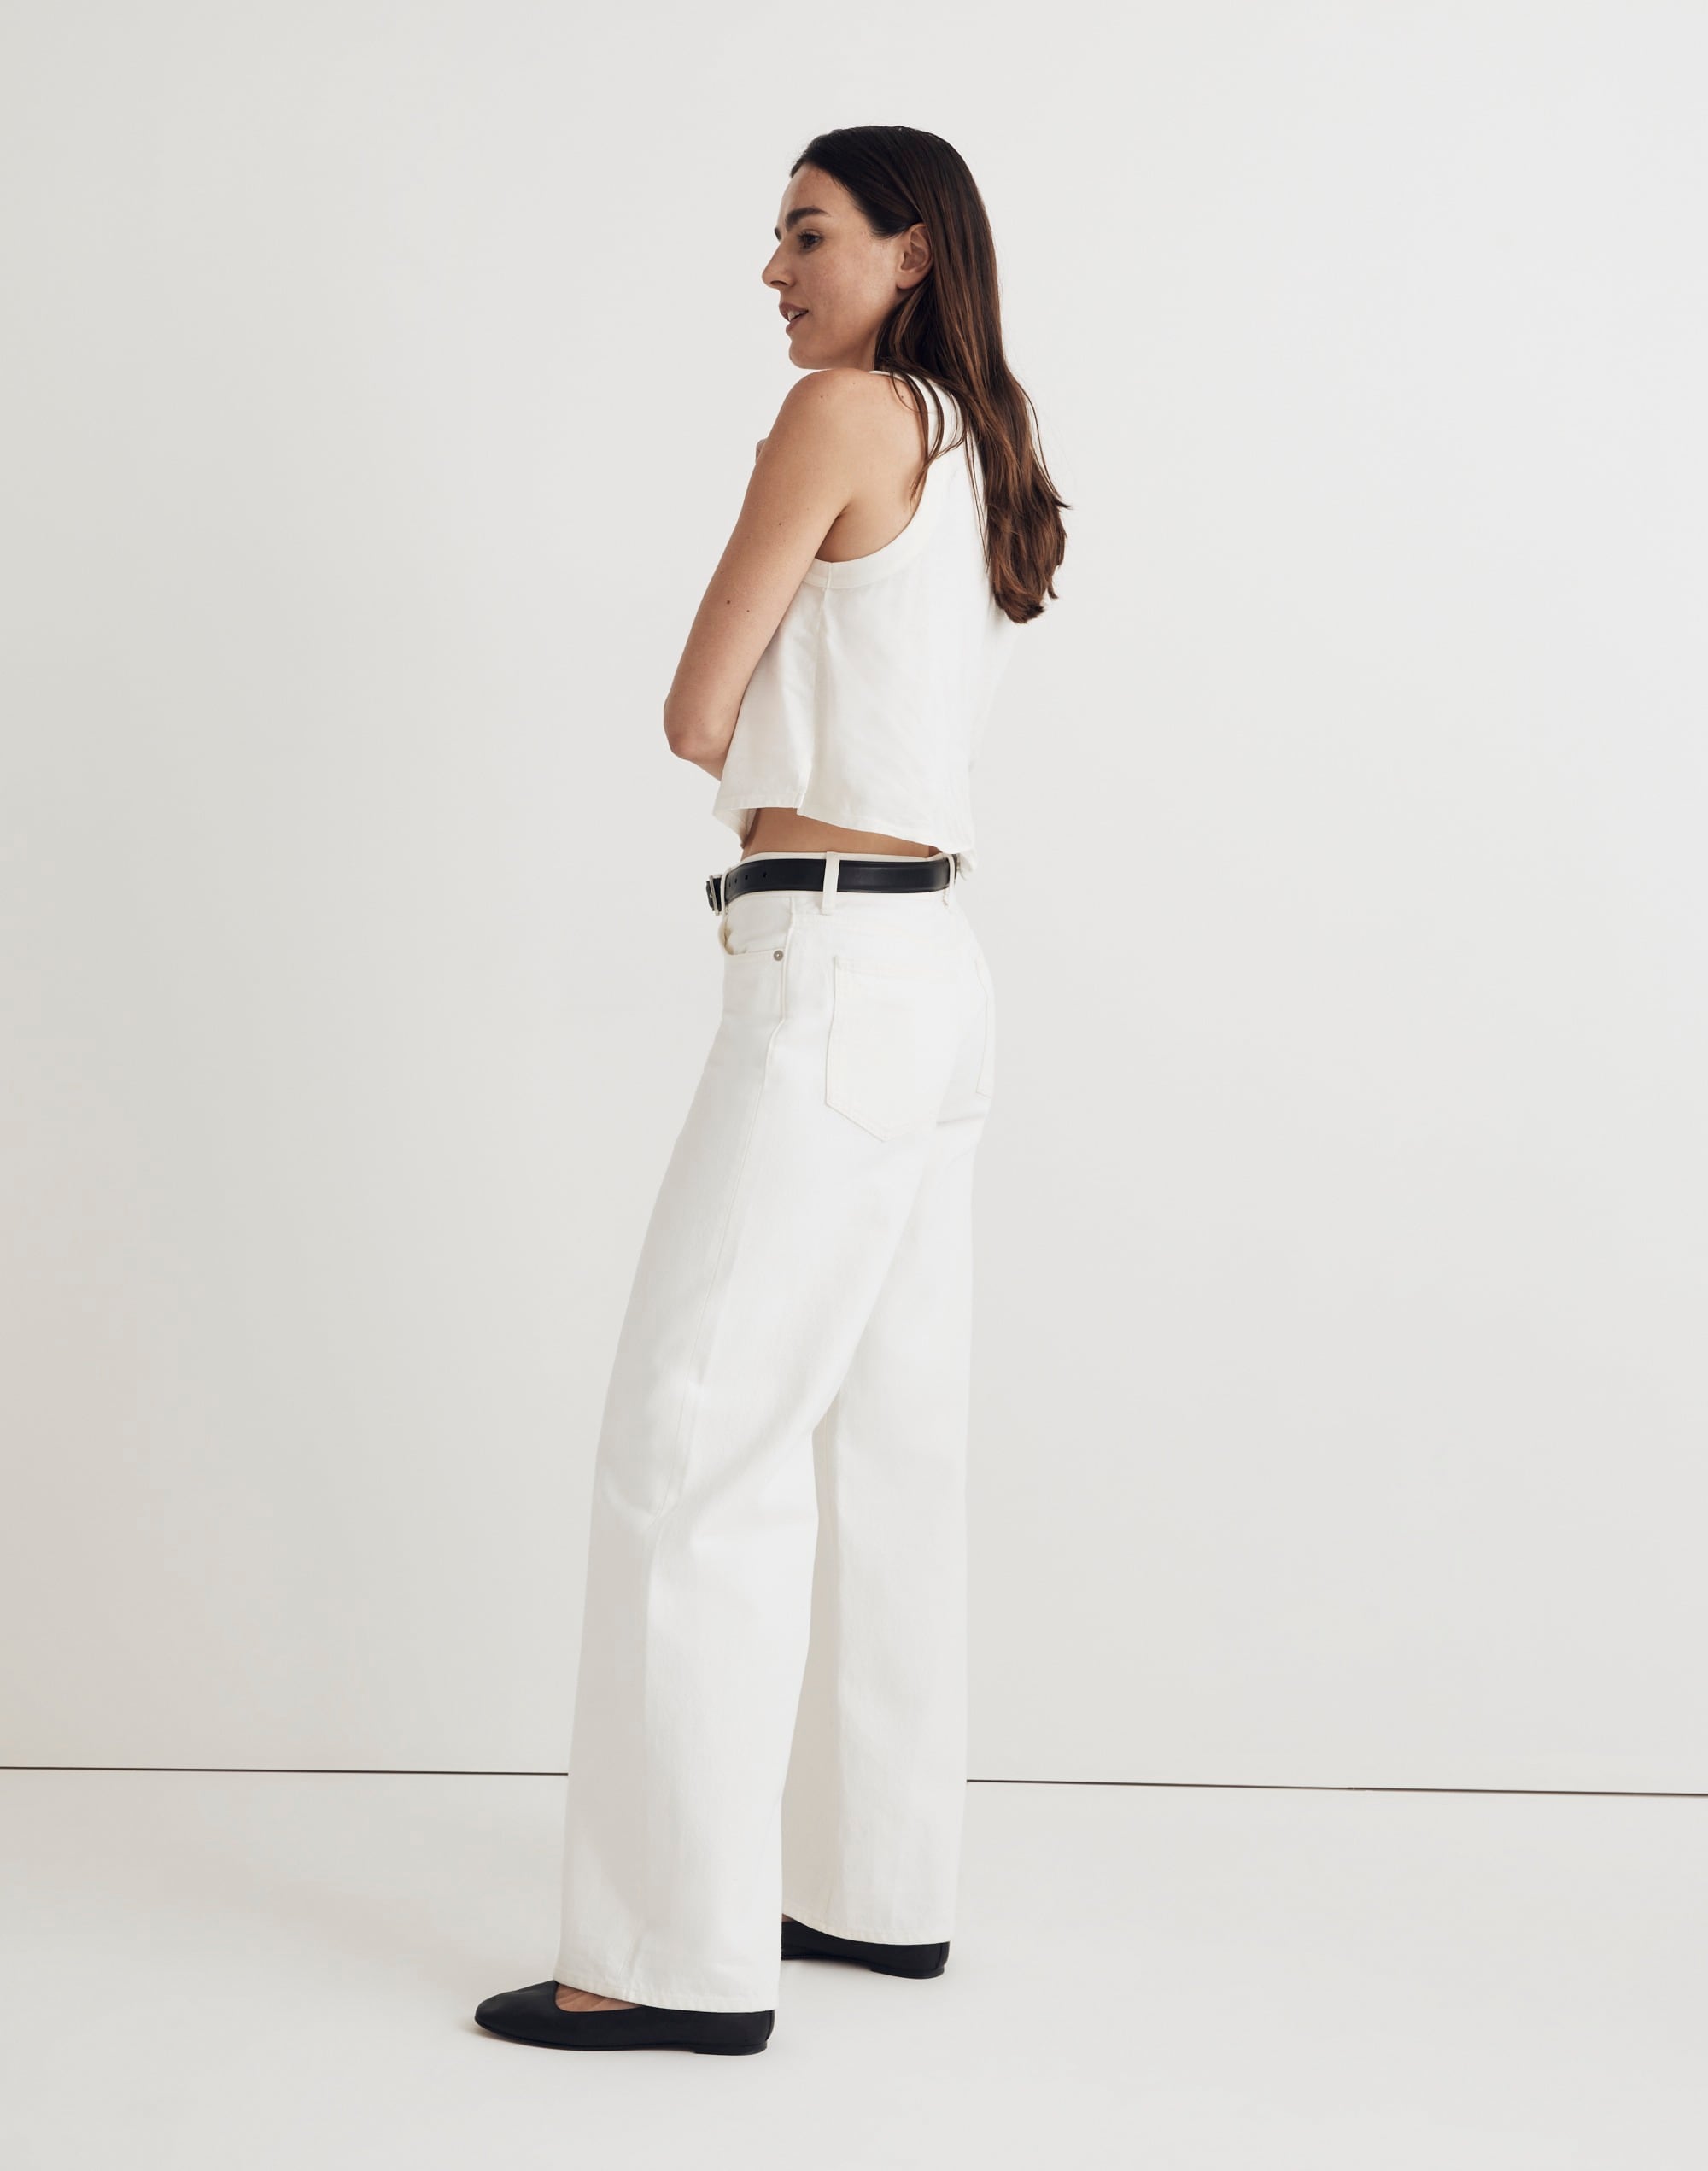 Low-Rise Superwide-Leg Jeans in Tile White